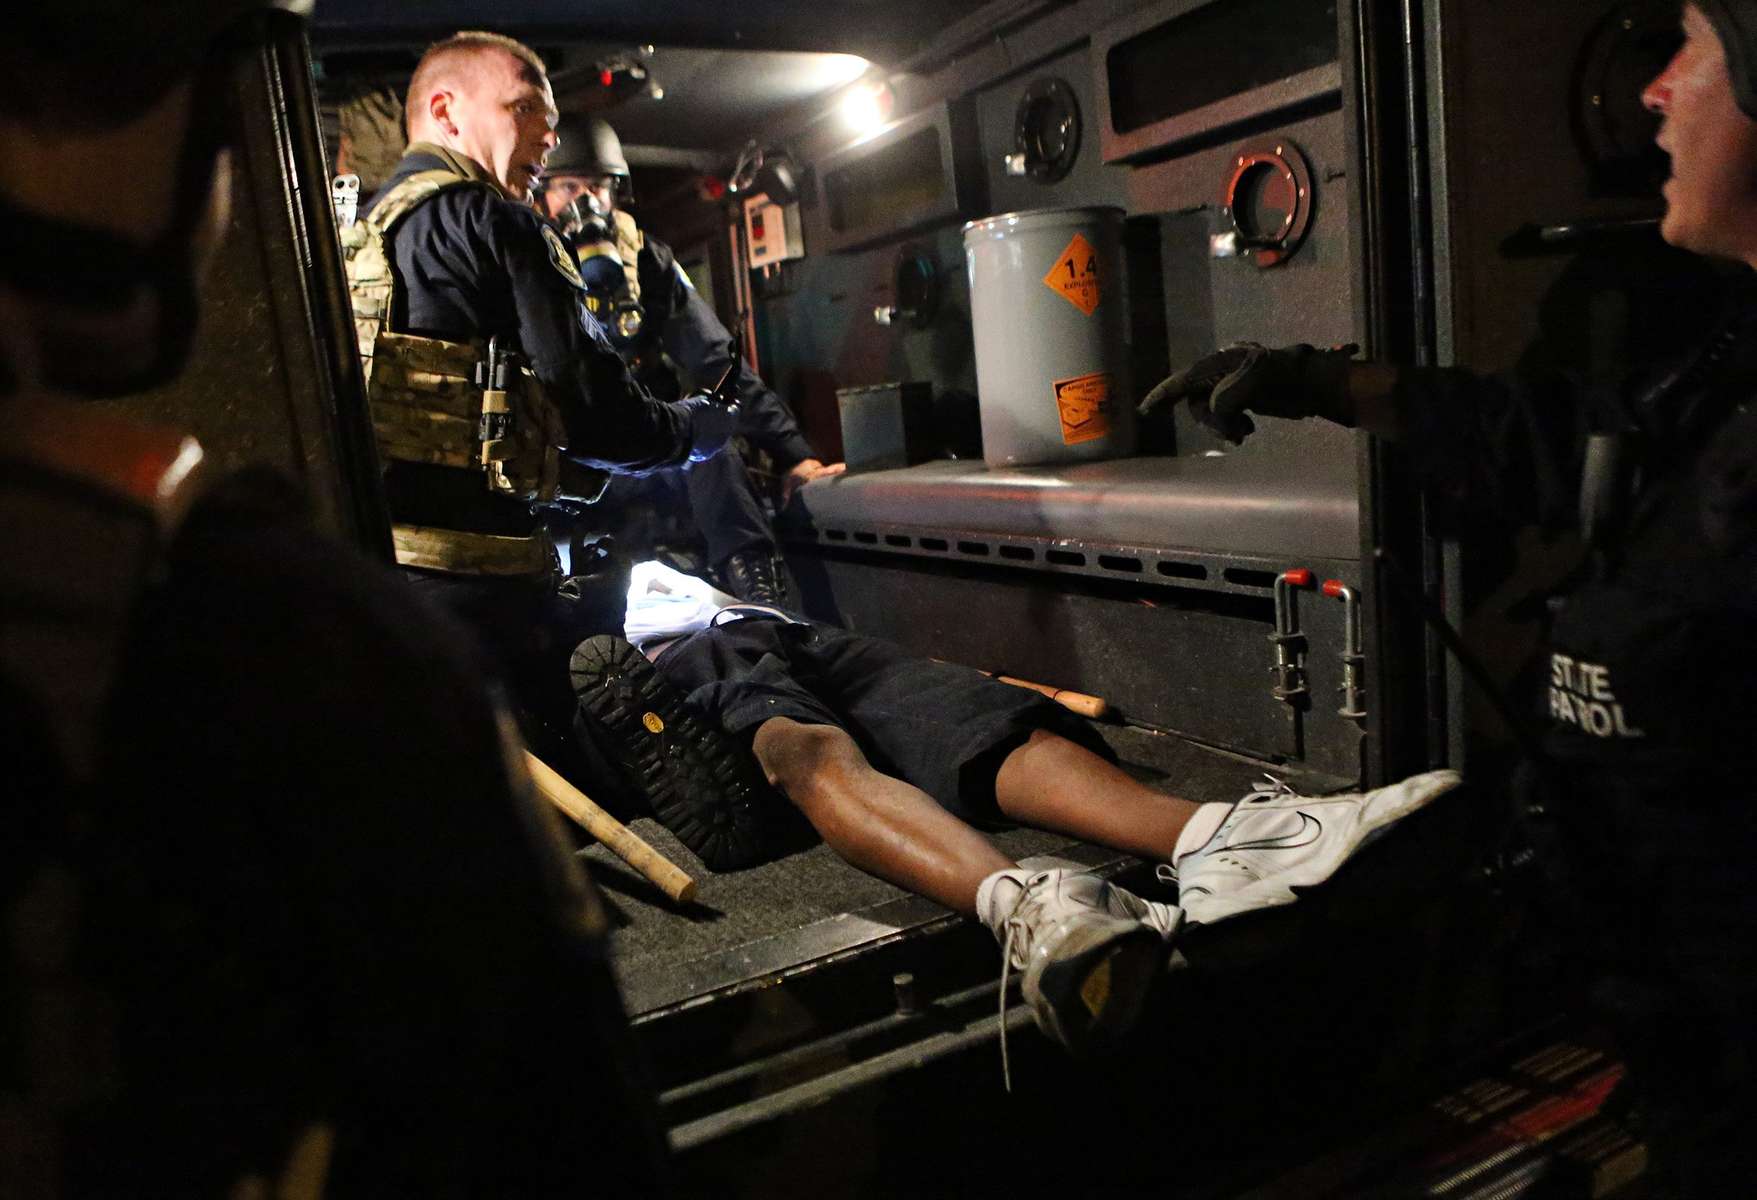 Members of the Missouri Highway Patrol tactical team treat an injured man found in a ditch during demonstrations along W. Florissant Road near the QuikTrip in Ferguson, Mo. on Tuesday, Aug. 19, 2014.